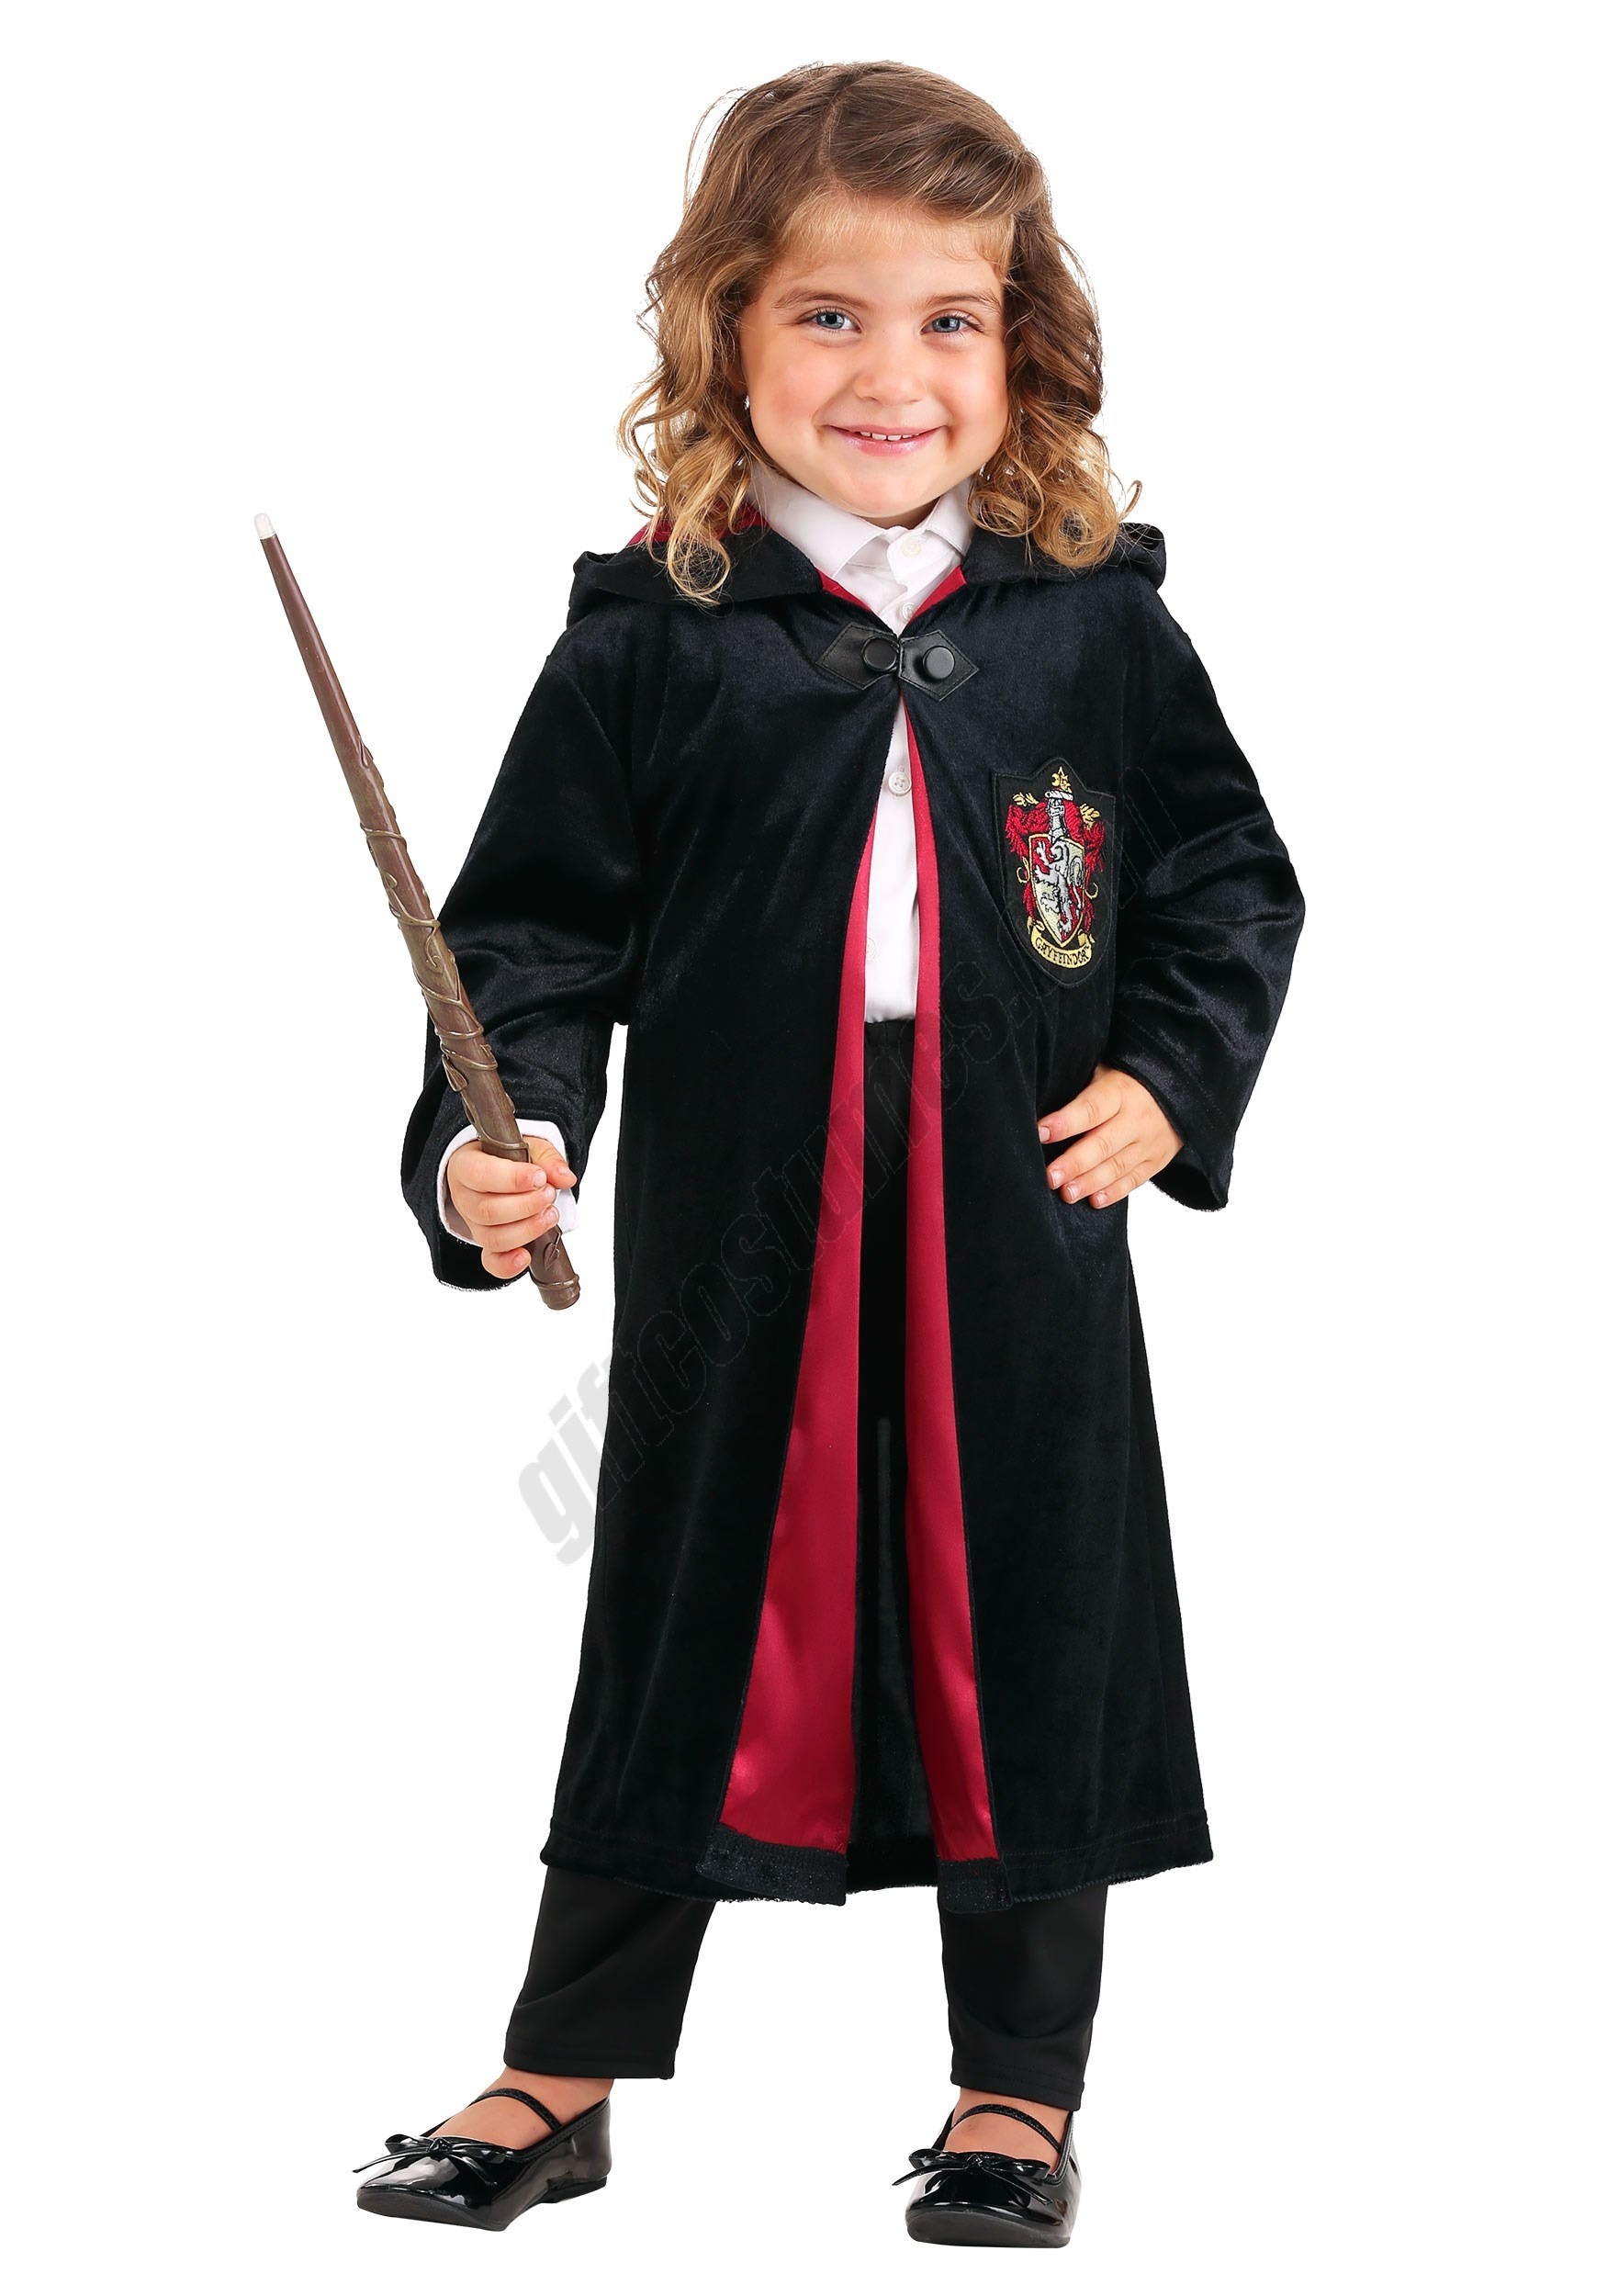 Harry Potter Toddler's Deluxe Gryffindor Robe Costume Promotions - Harry Potter Toddler's Deluxe Gryffindor Robe Costume Promotions